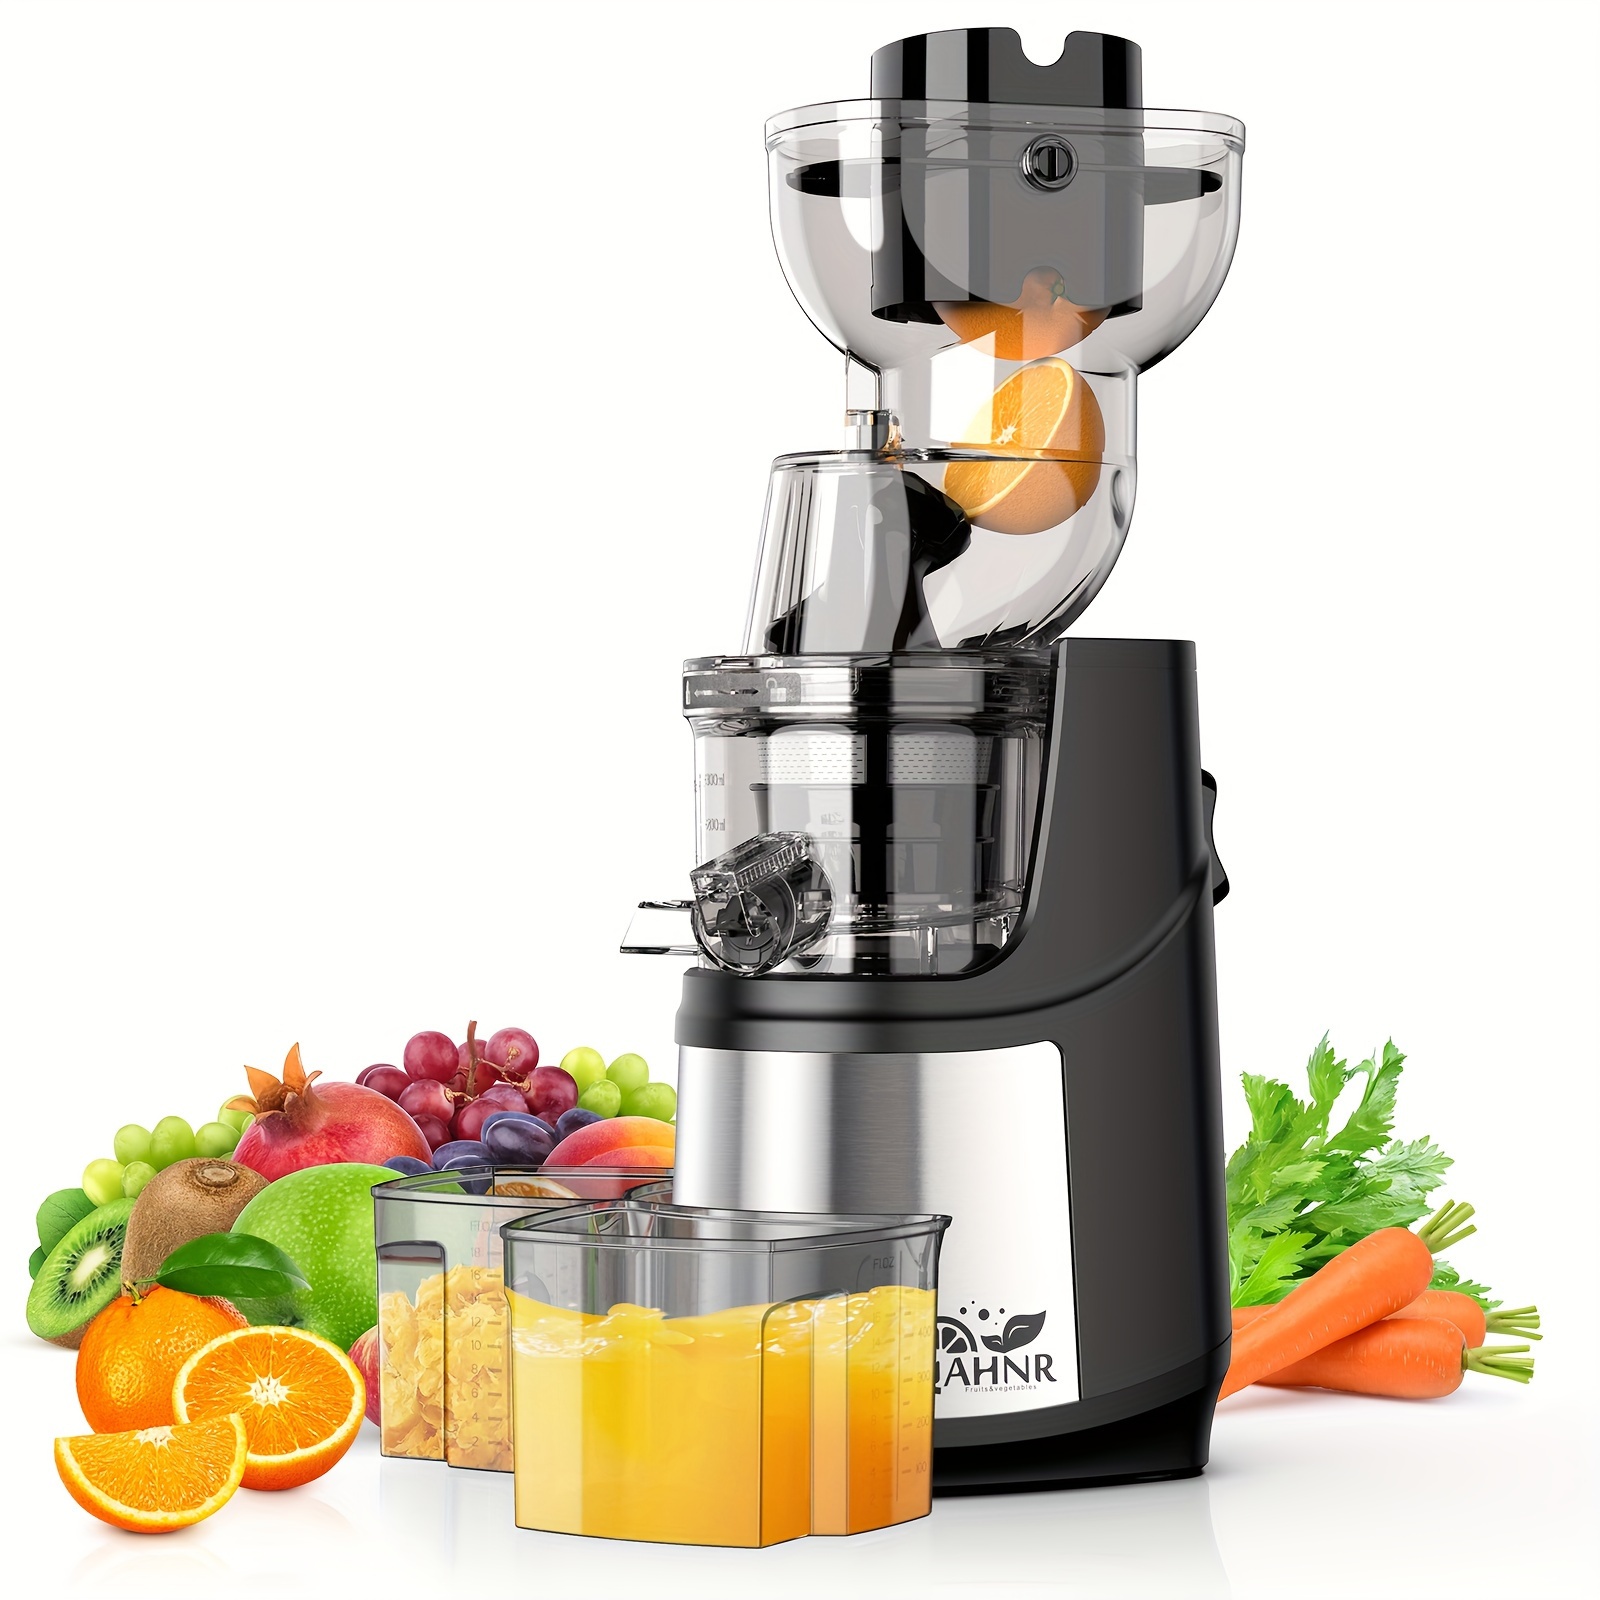 

Cold Press Juicer Machines, 300w Slow Masticating Juicer Machines Vegetable And Fruit With 3.54" Large Feed Chute, Electric Juicer Machines Cold Pressed, Reverse Function Easy To Clean With Brush